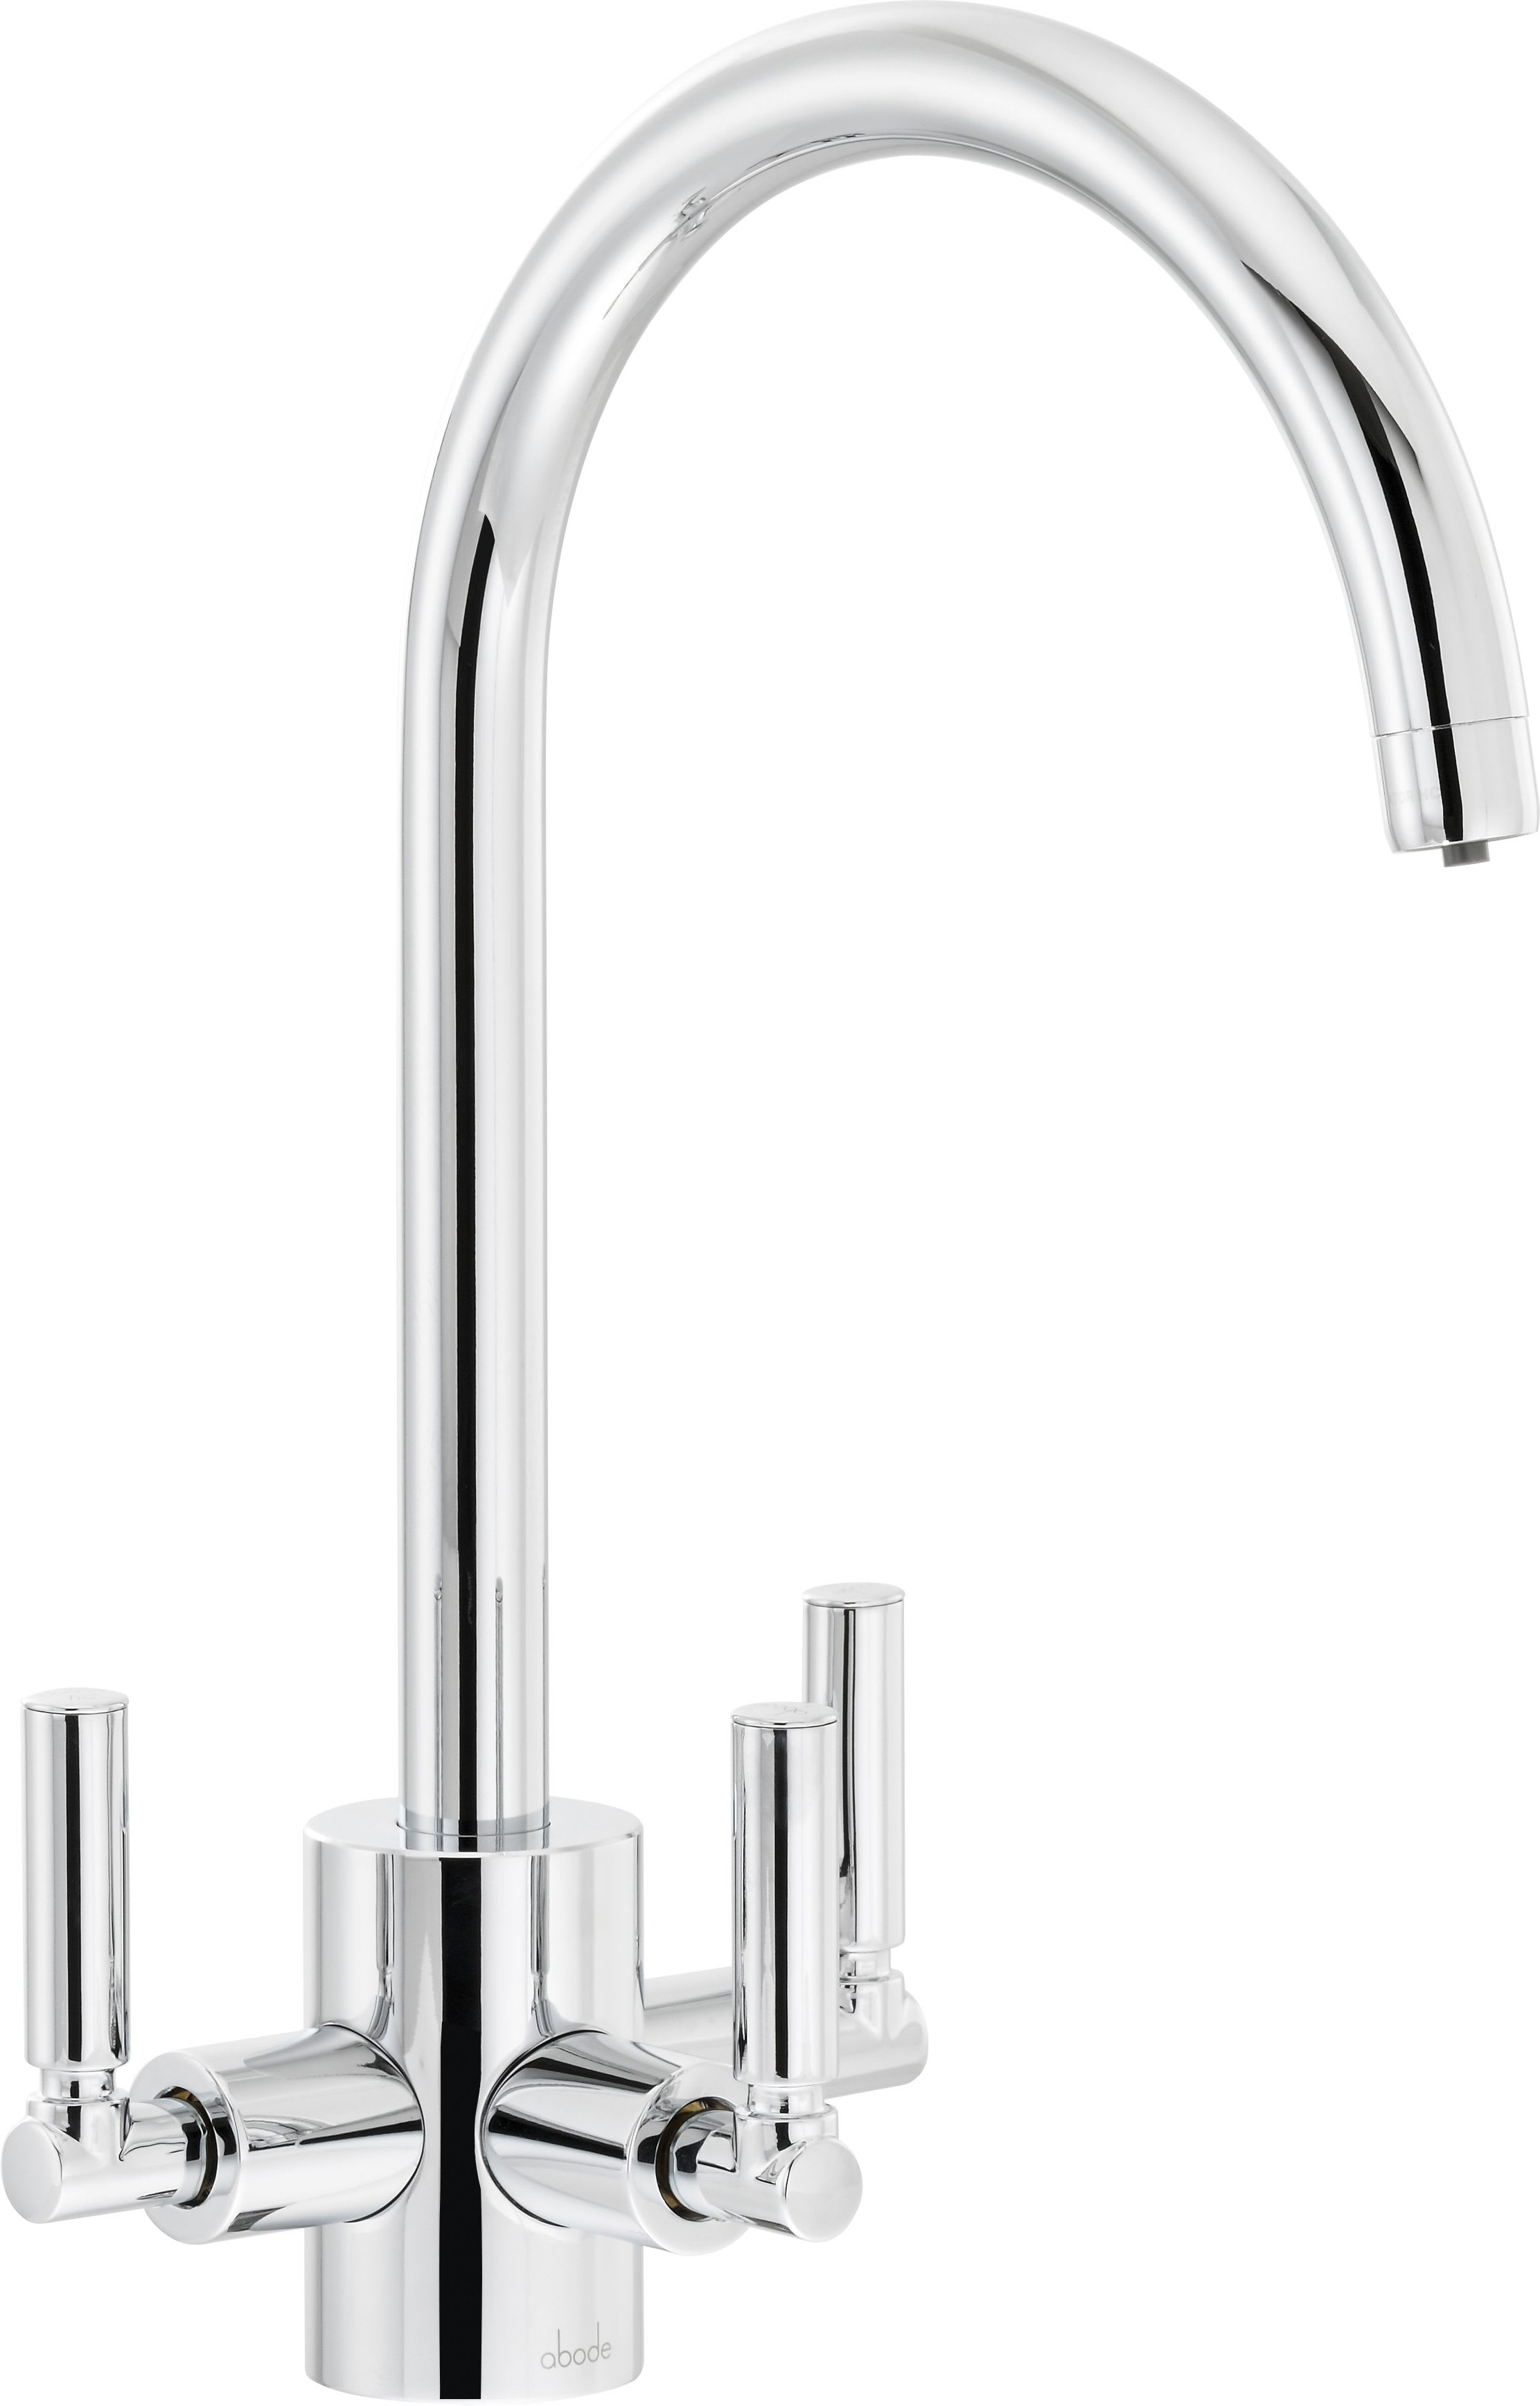 Abode Orcus Aquifier Dual Lever Filter Sink Tap